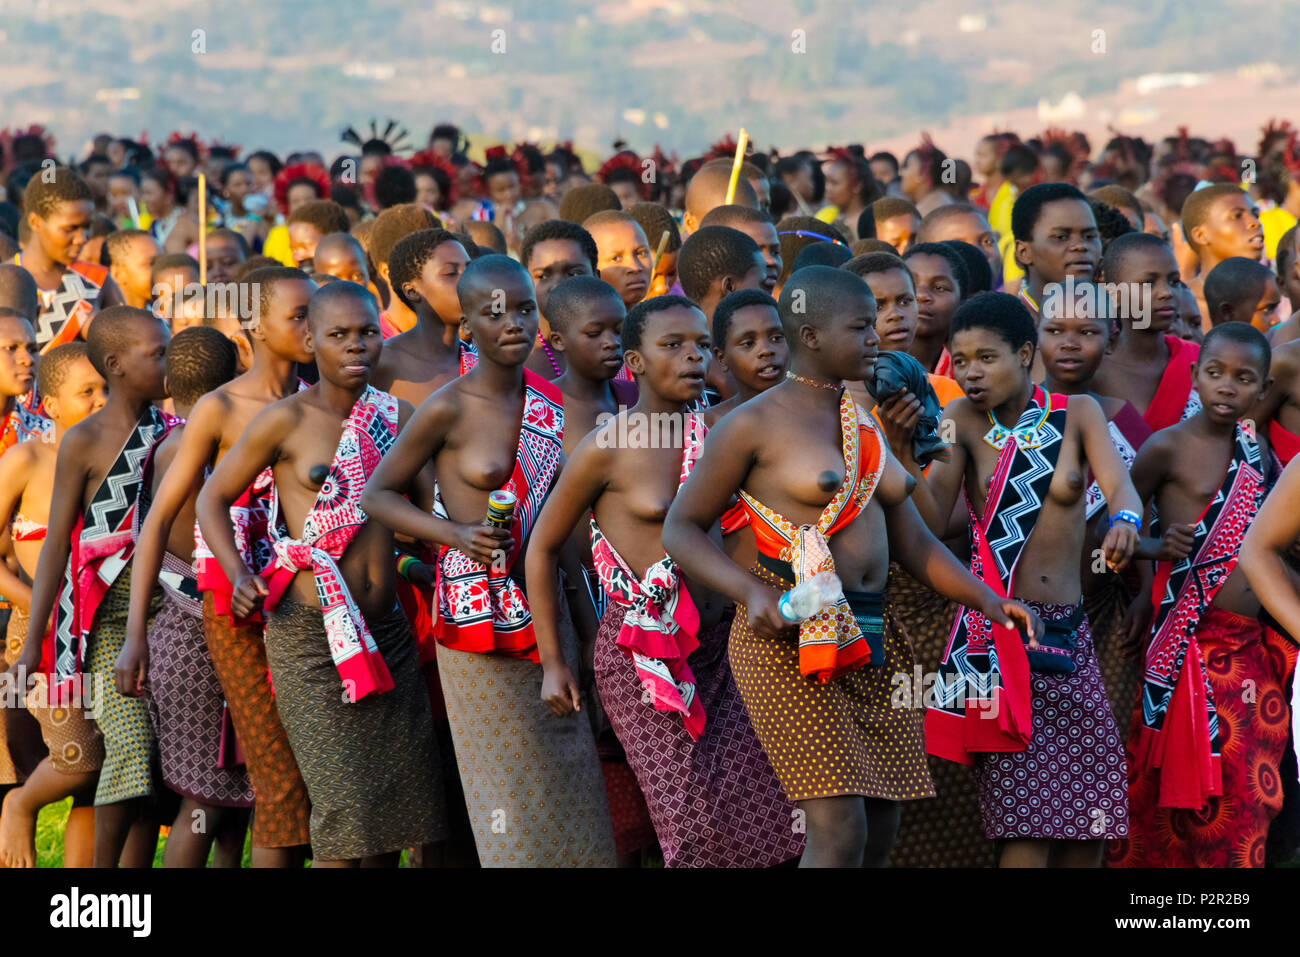 Swazi Mädchen Parade In Umhlanga Reed Dance Festival Swasiland 